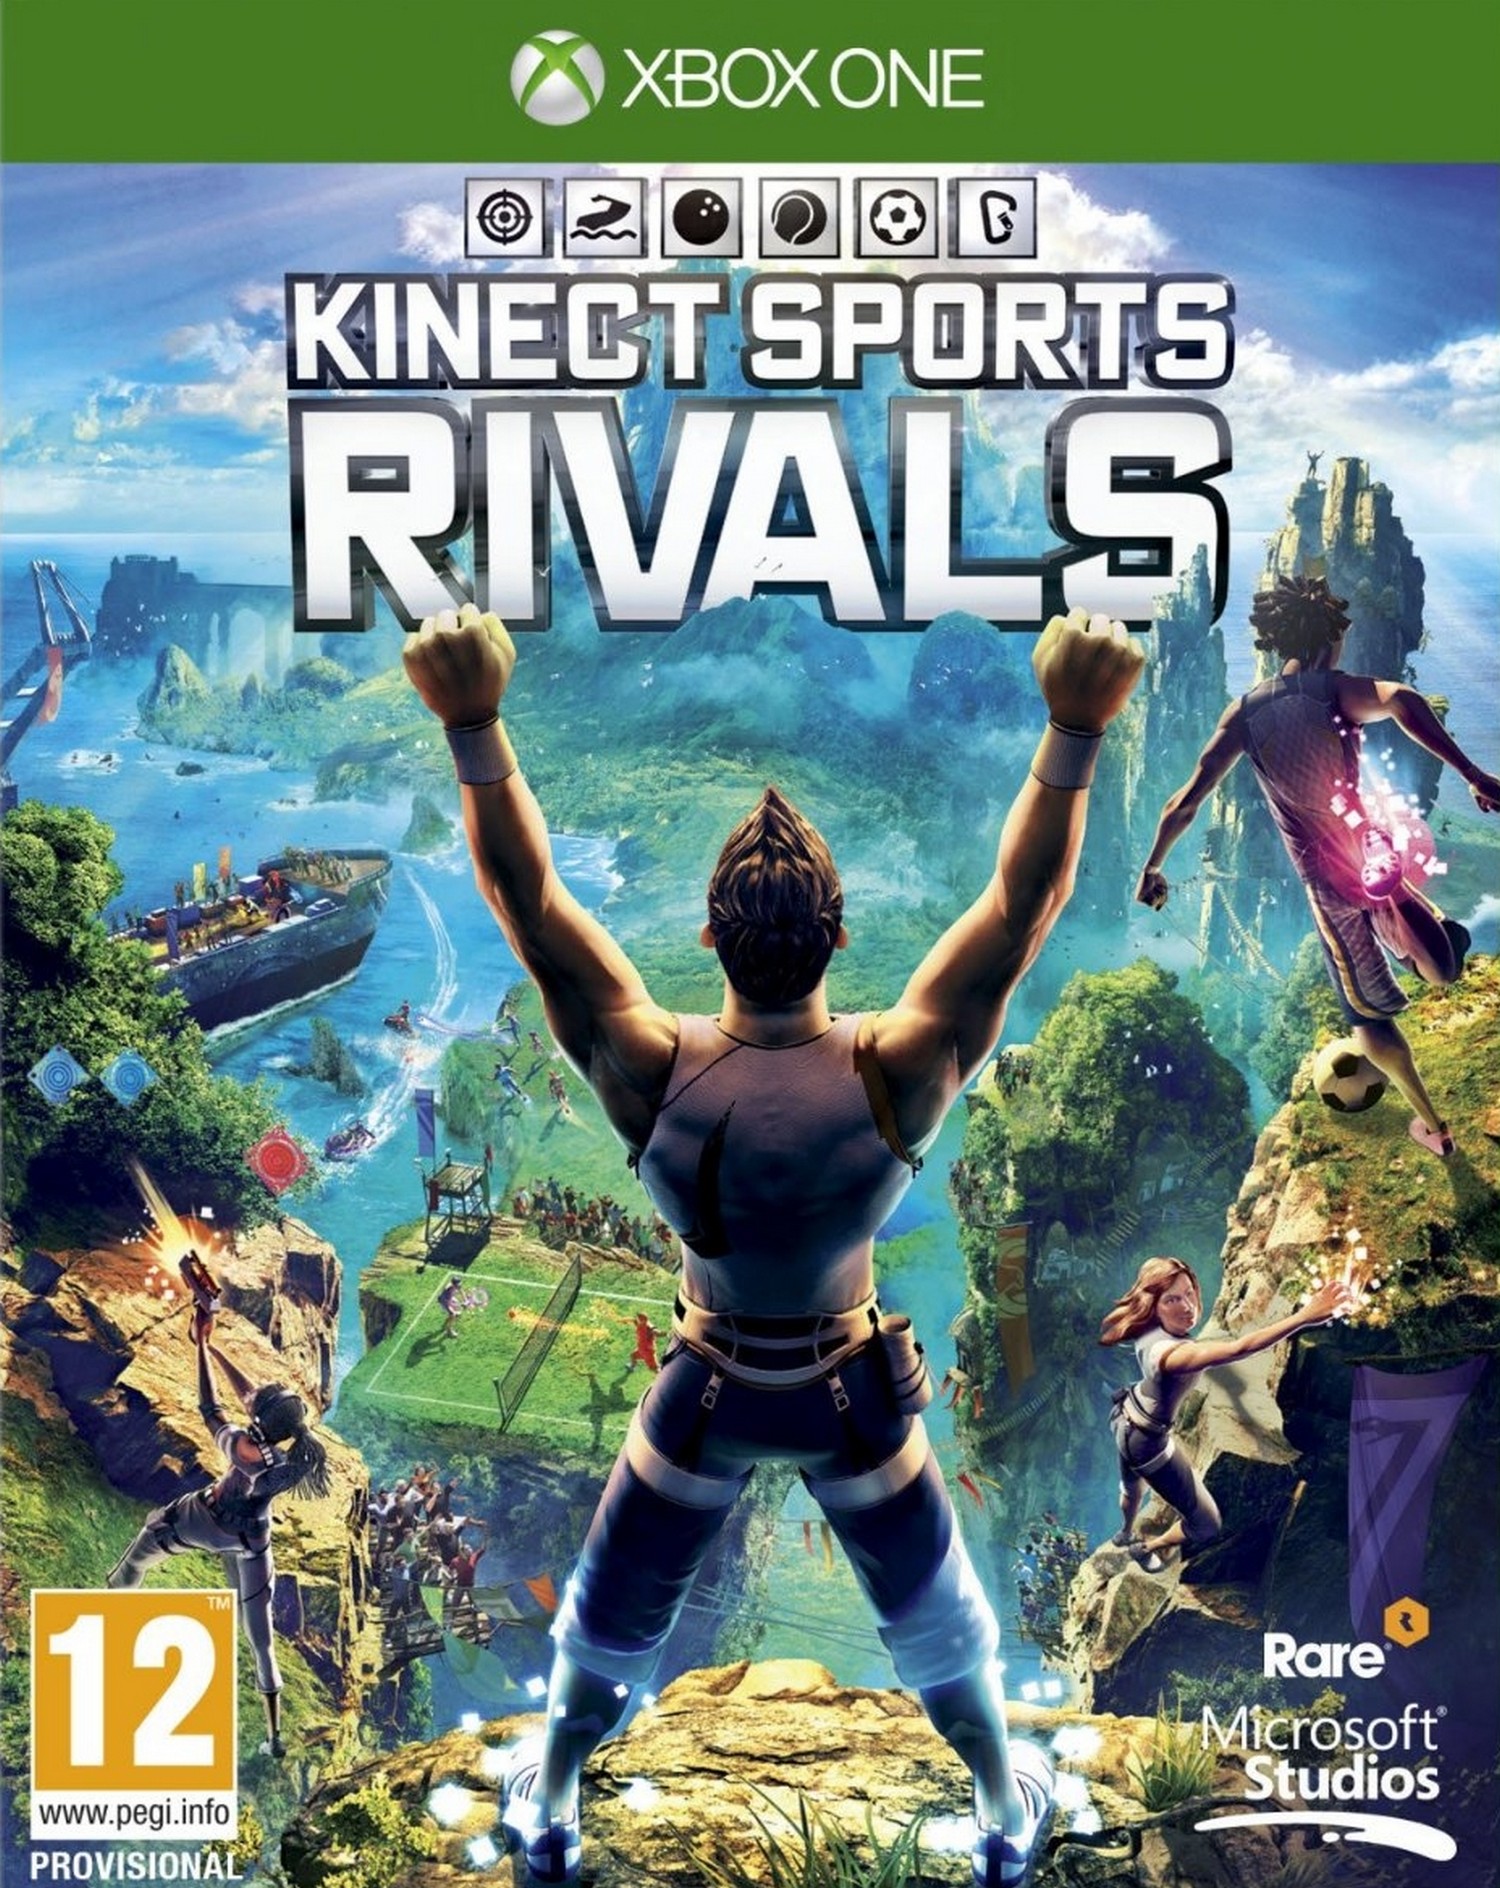 Xbox One Kinect Sports: Rivals